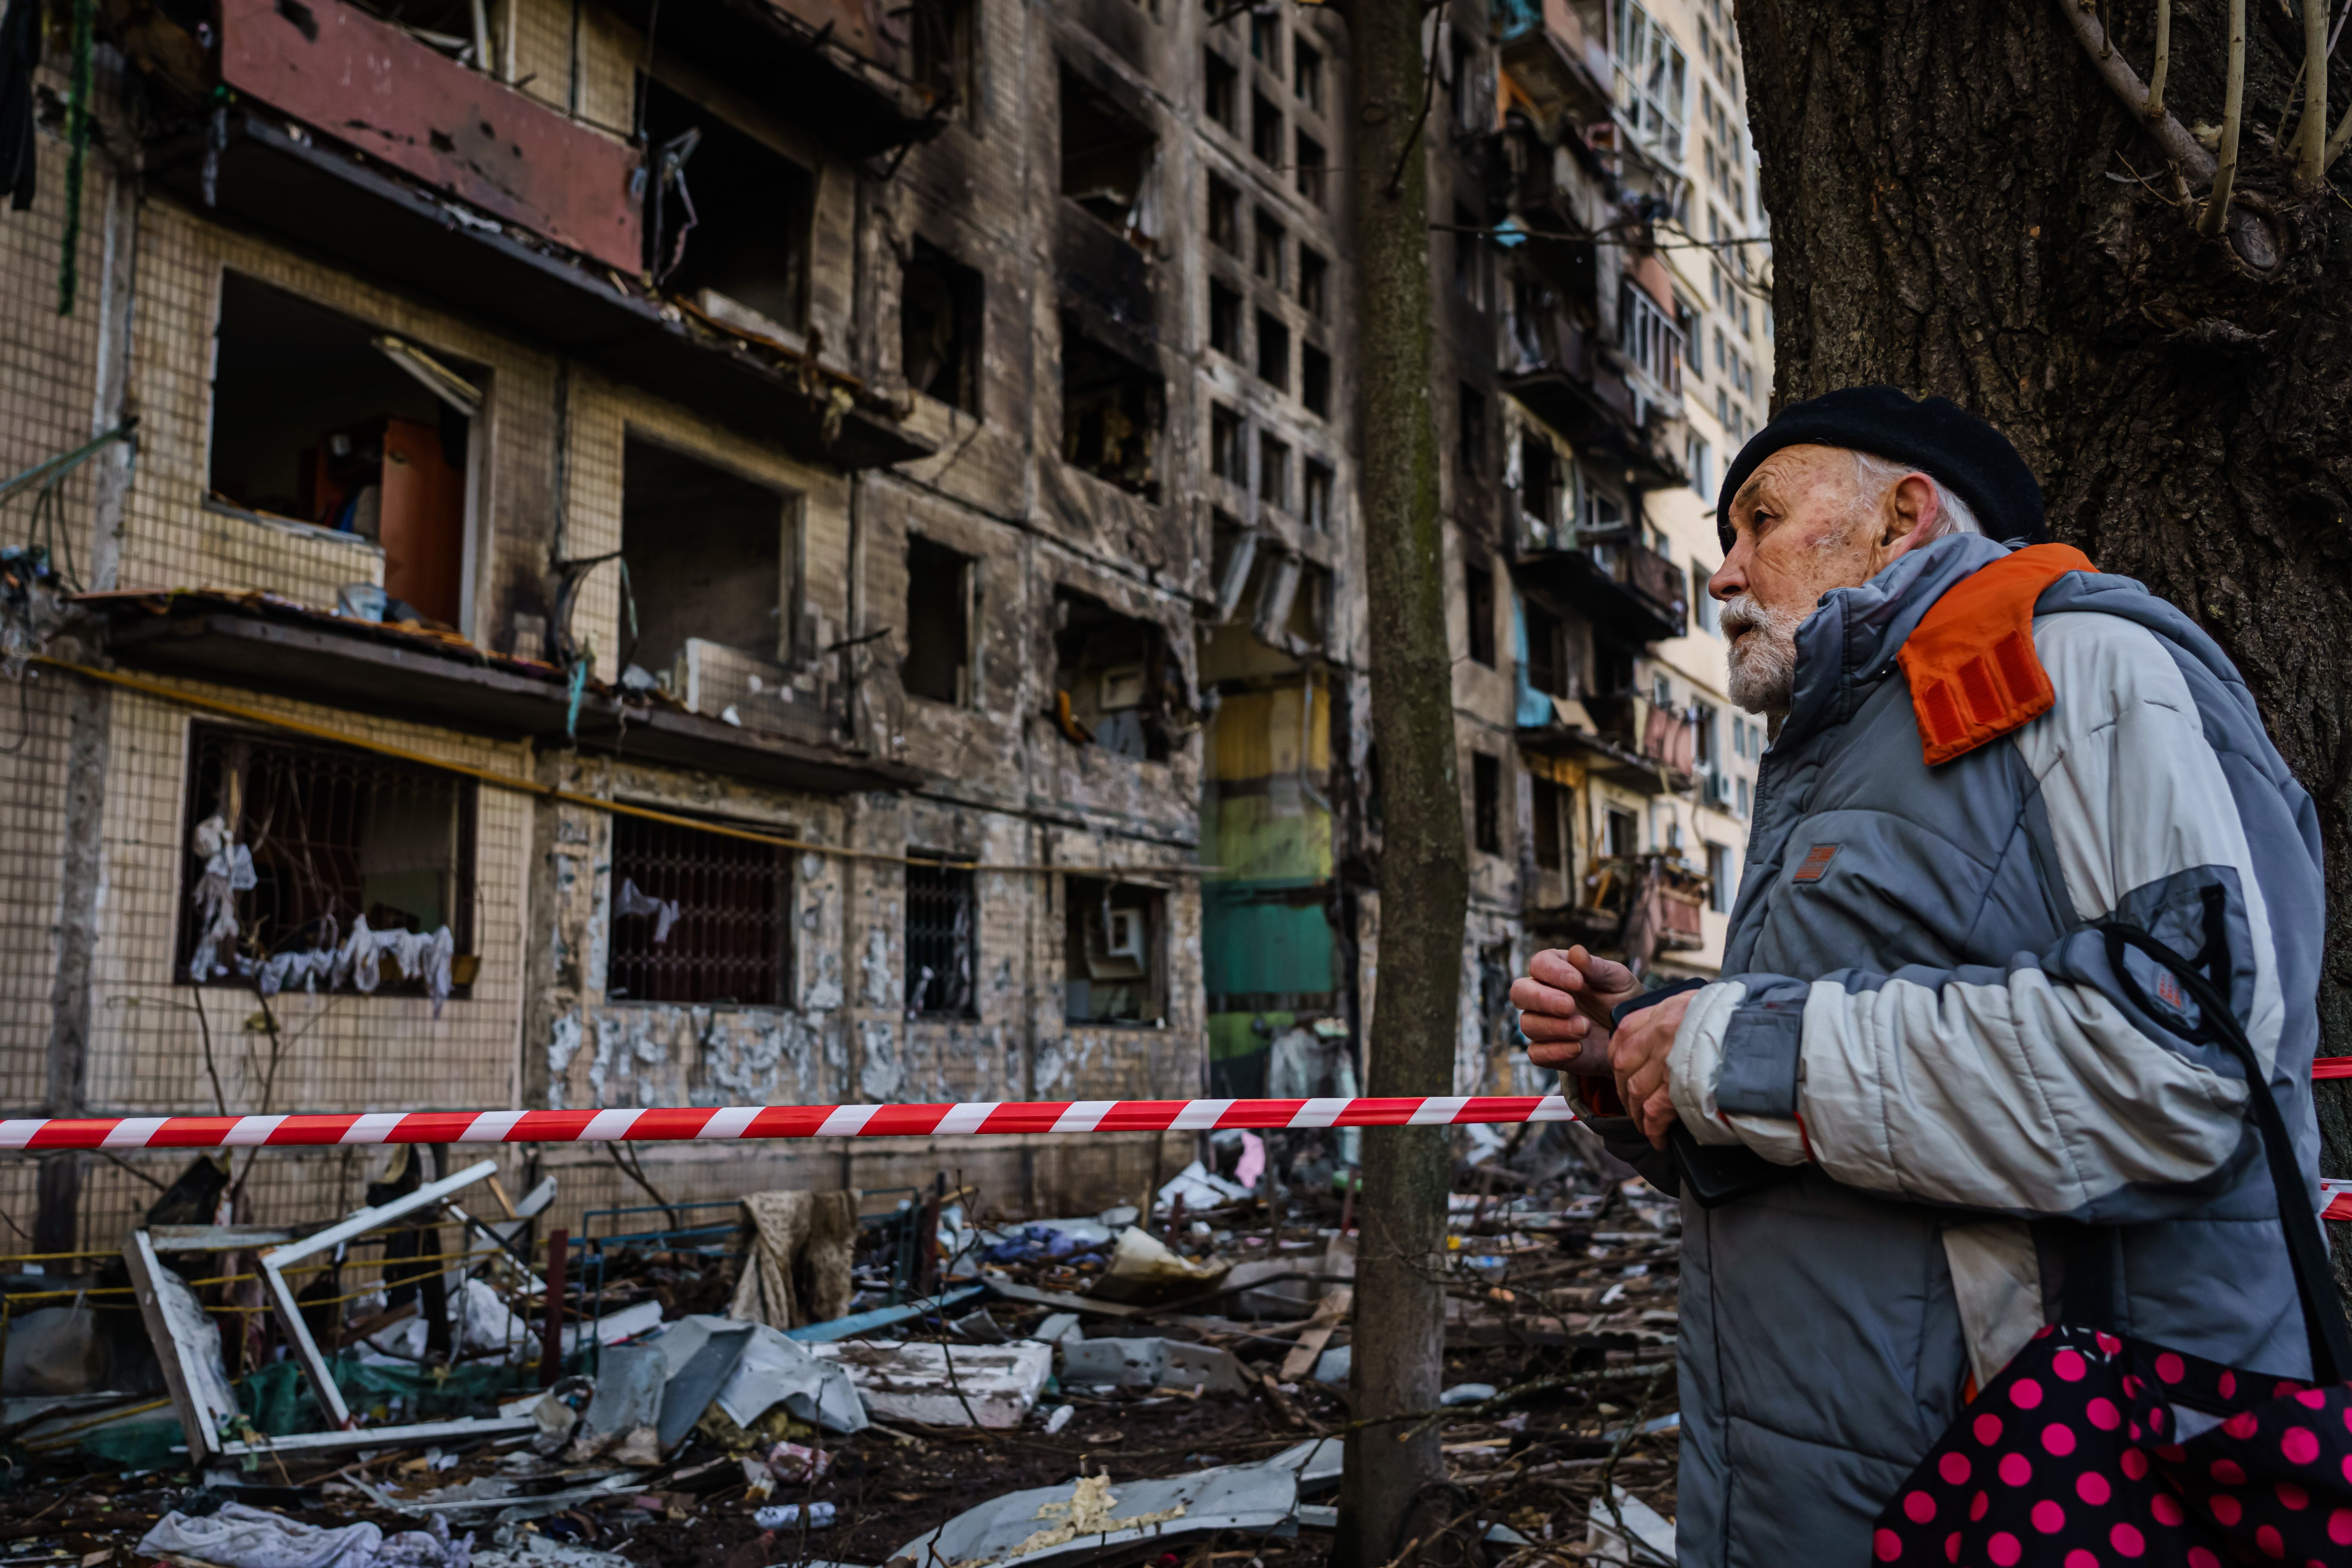 A man looks on at the damaged to apartment building, caused by what Kyiv officials call a Russian bombardment, in the Obolon neighborhood of Irpin, Ukraine, Monday, March 14.